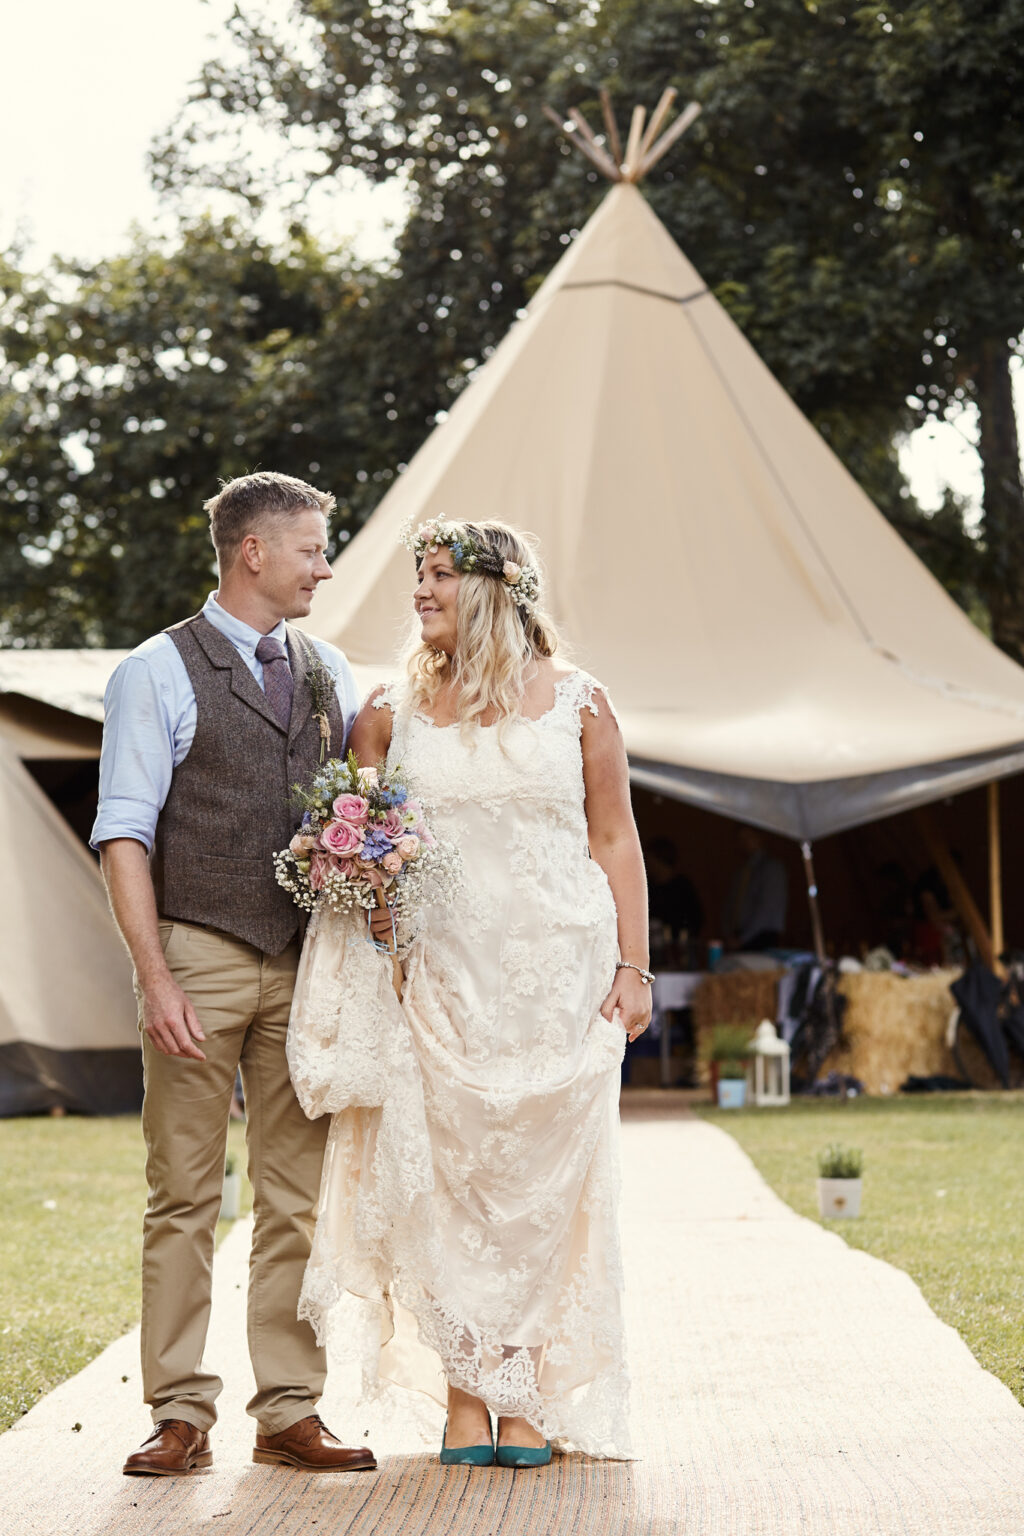 Our ECO Wedding Suppliers At Wellington Wood Norfolk